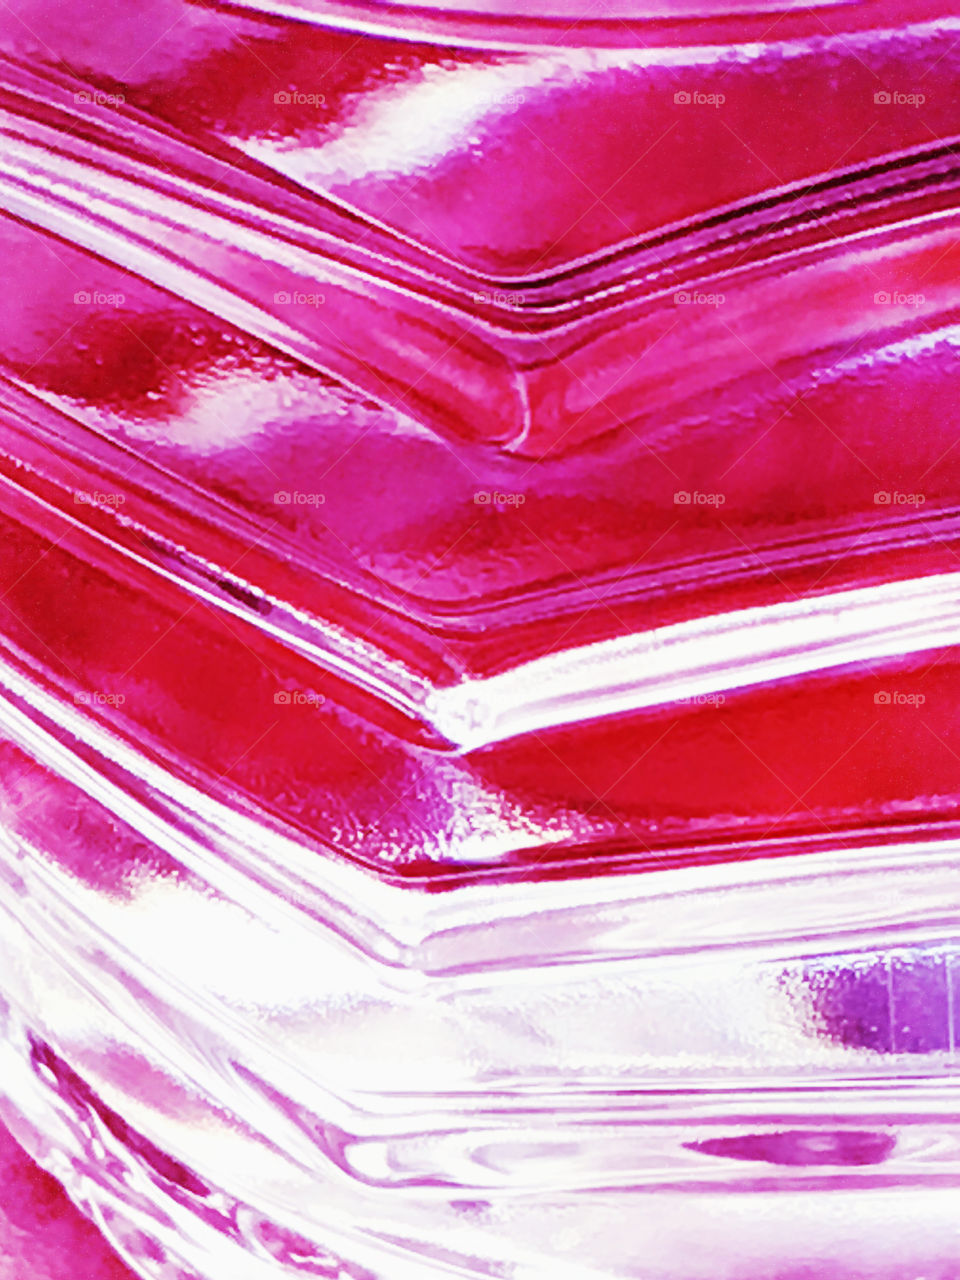 Magnified water bottle with hot pink reflections